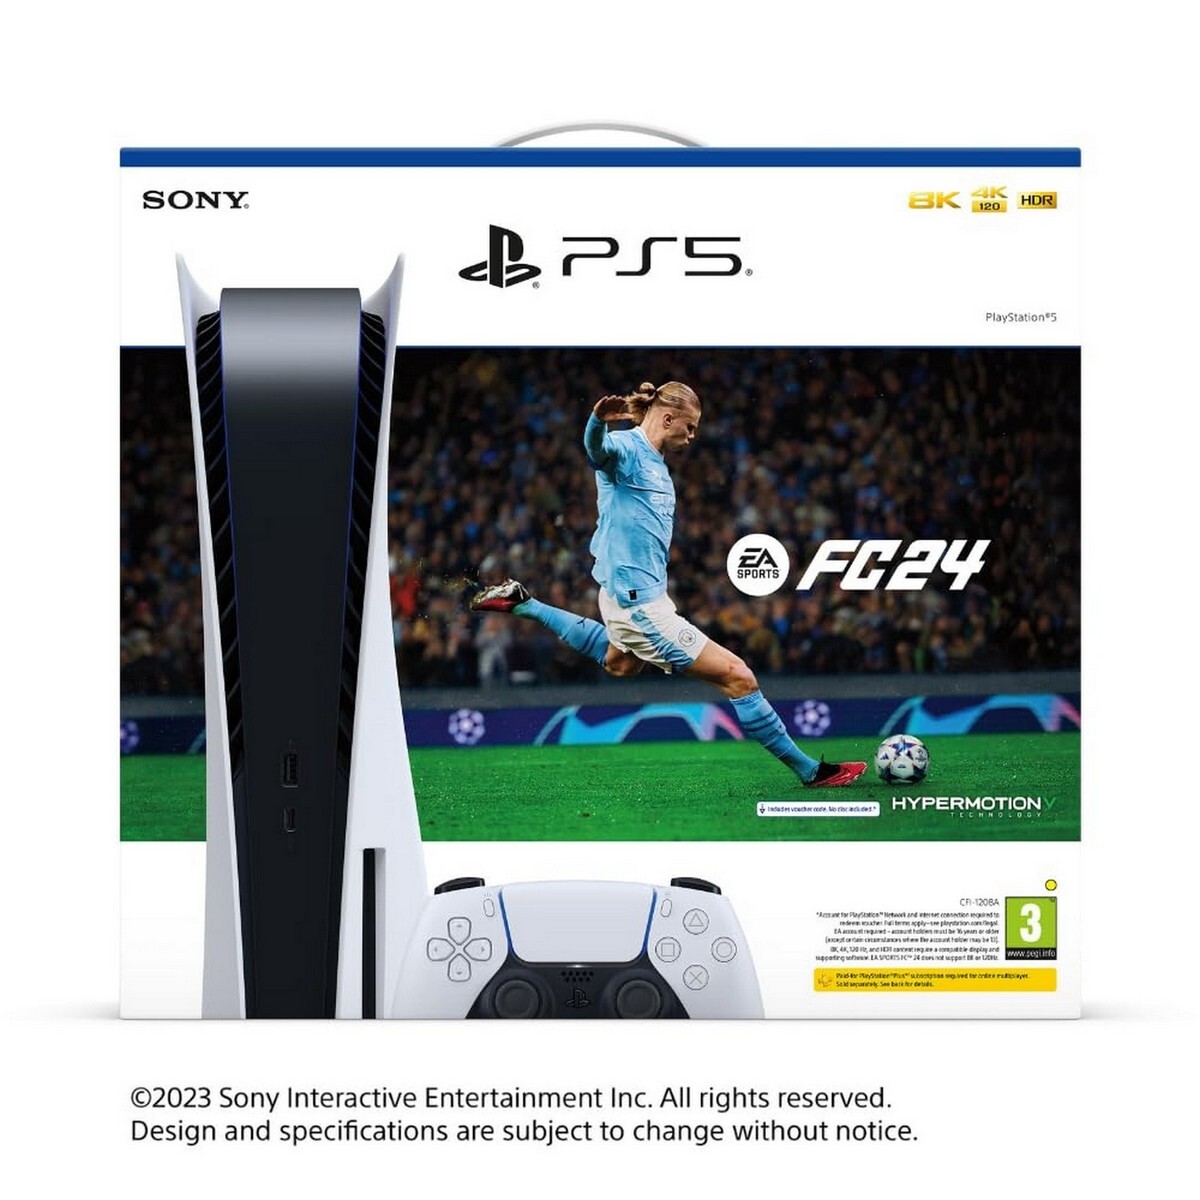 Sony PS5 Console Disc Edition Sports FC 24 Bundle